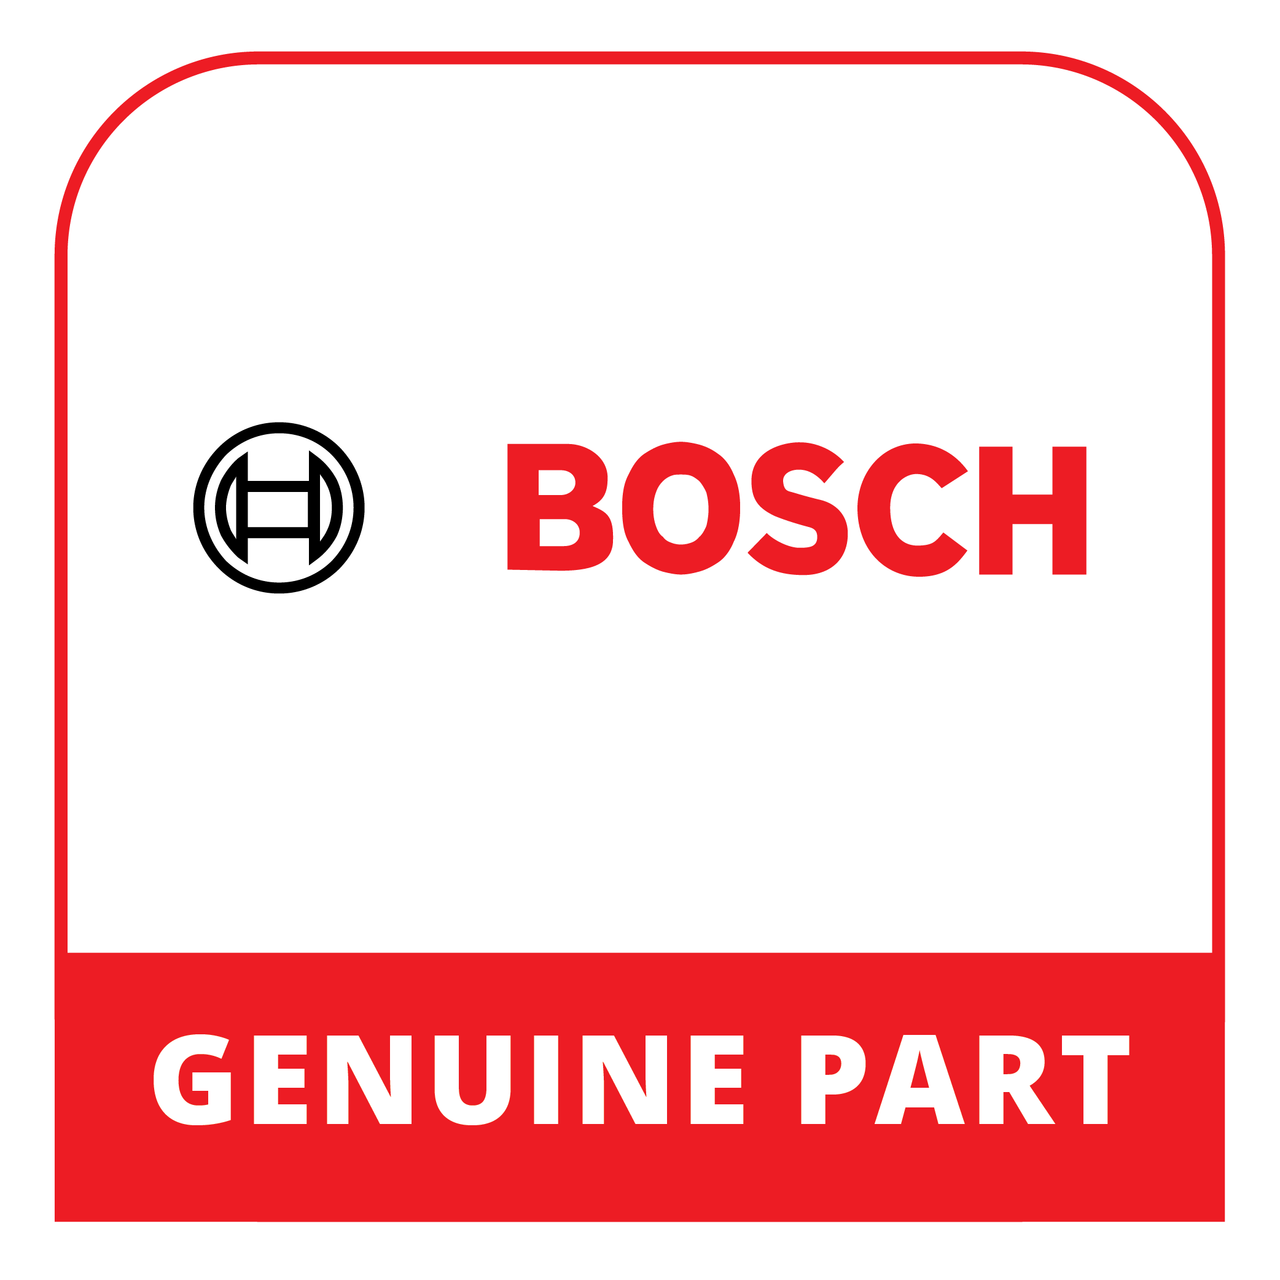 Bosch (Thermador) 12030611 - Heating Element - Genuine Bosch (Thermador) Part